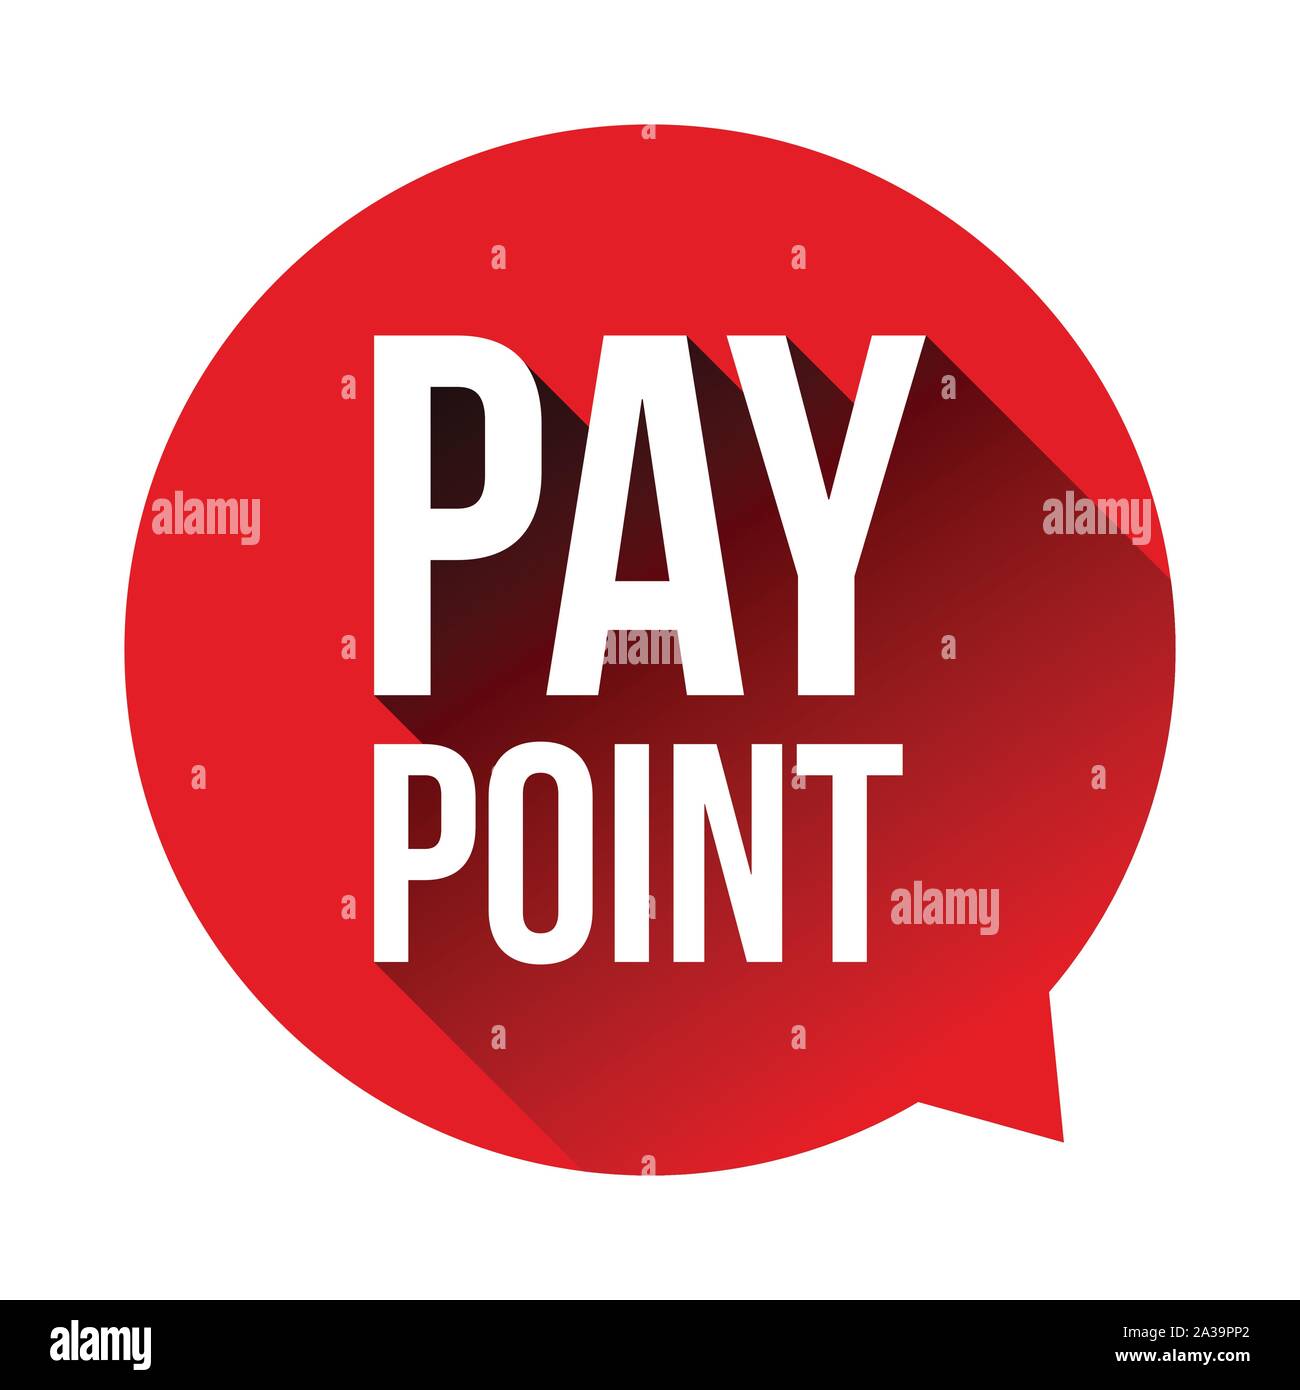 Pay Point sign label Stock Vector